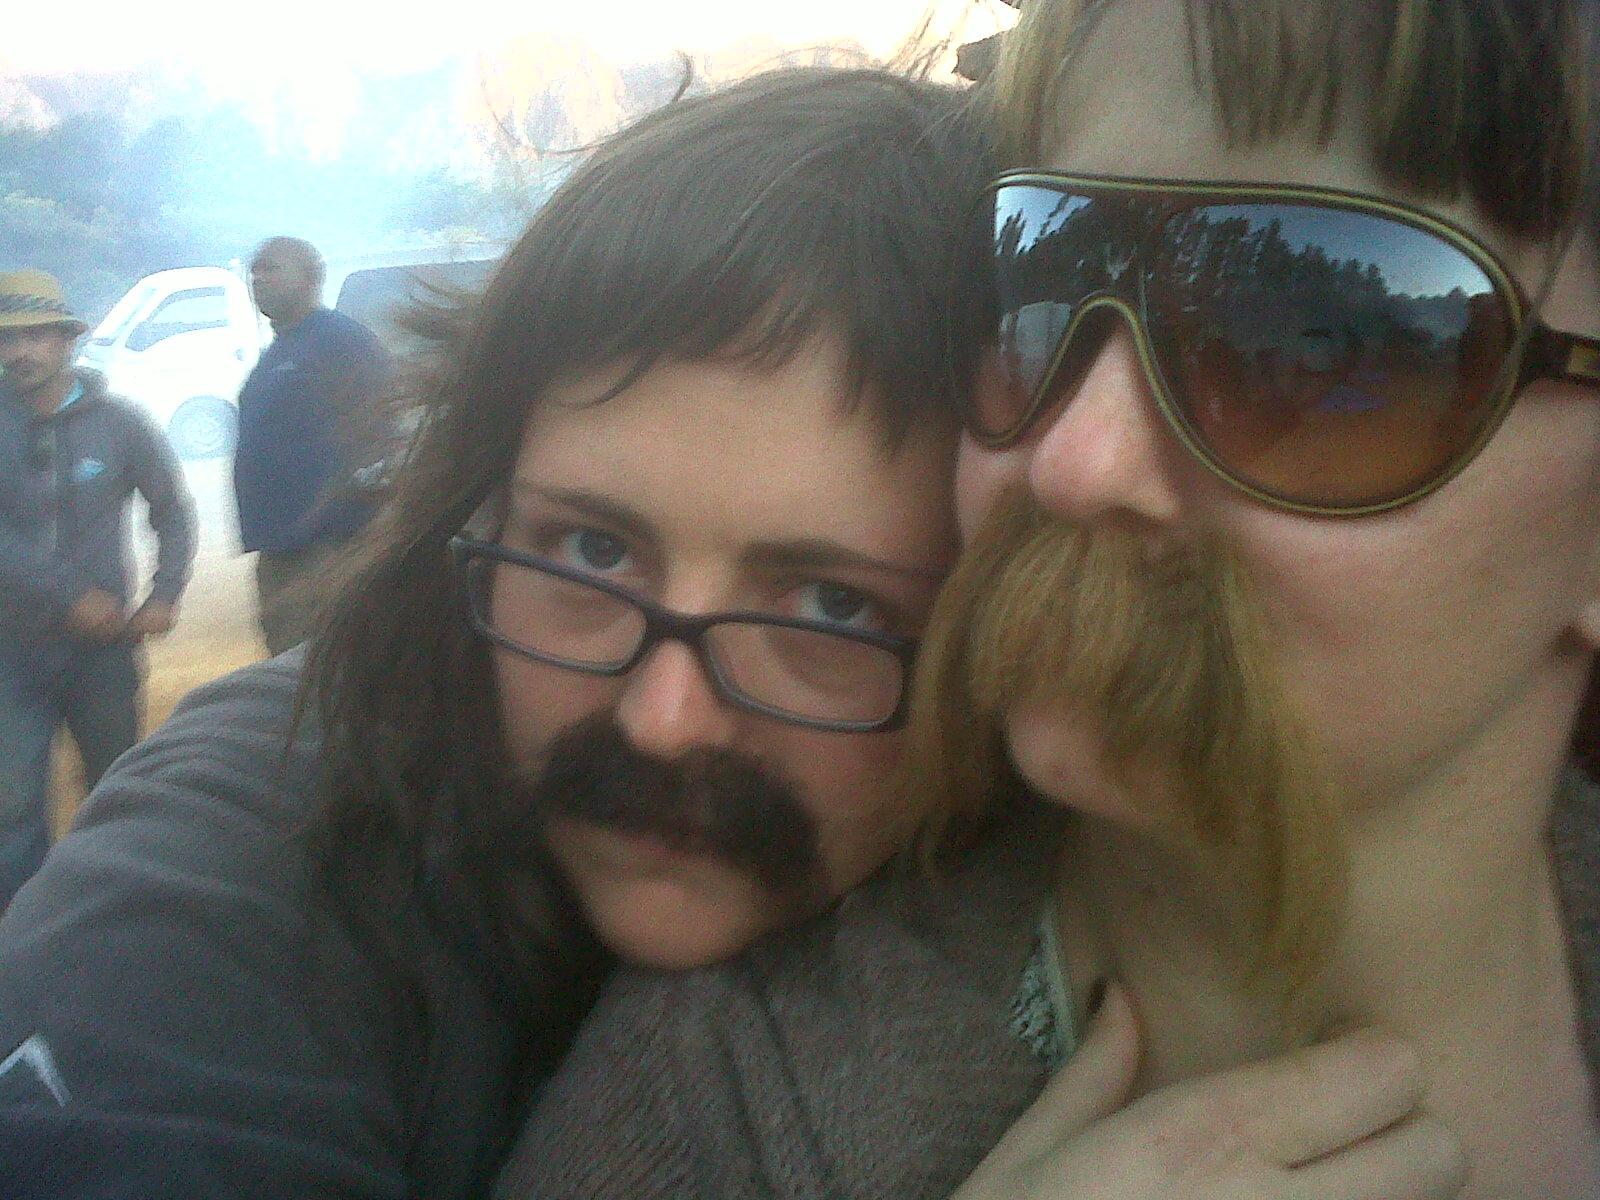 Movember 2011 - Why should the boys have all the fun? Me and Marissa Sonnemann